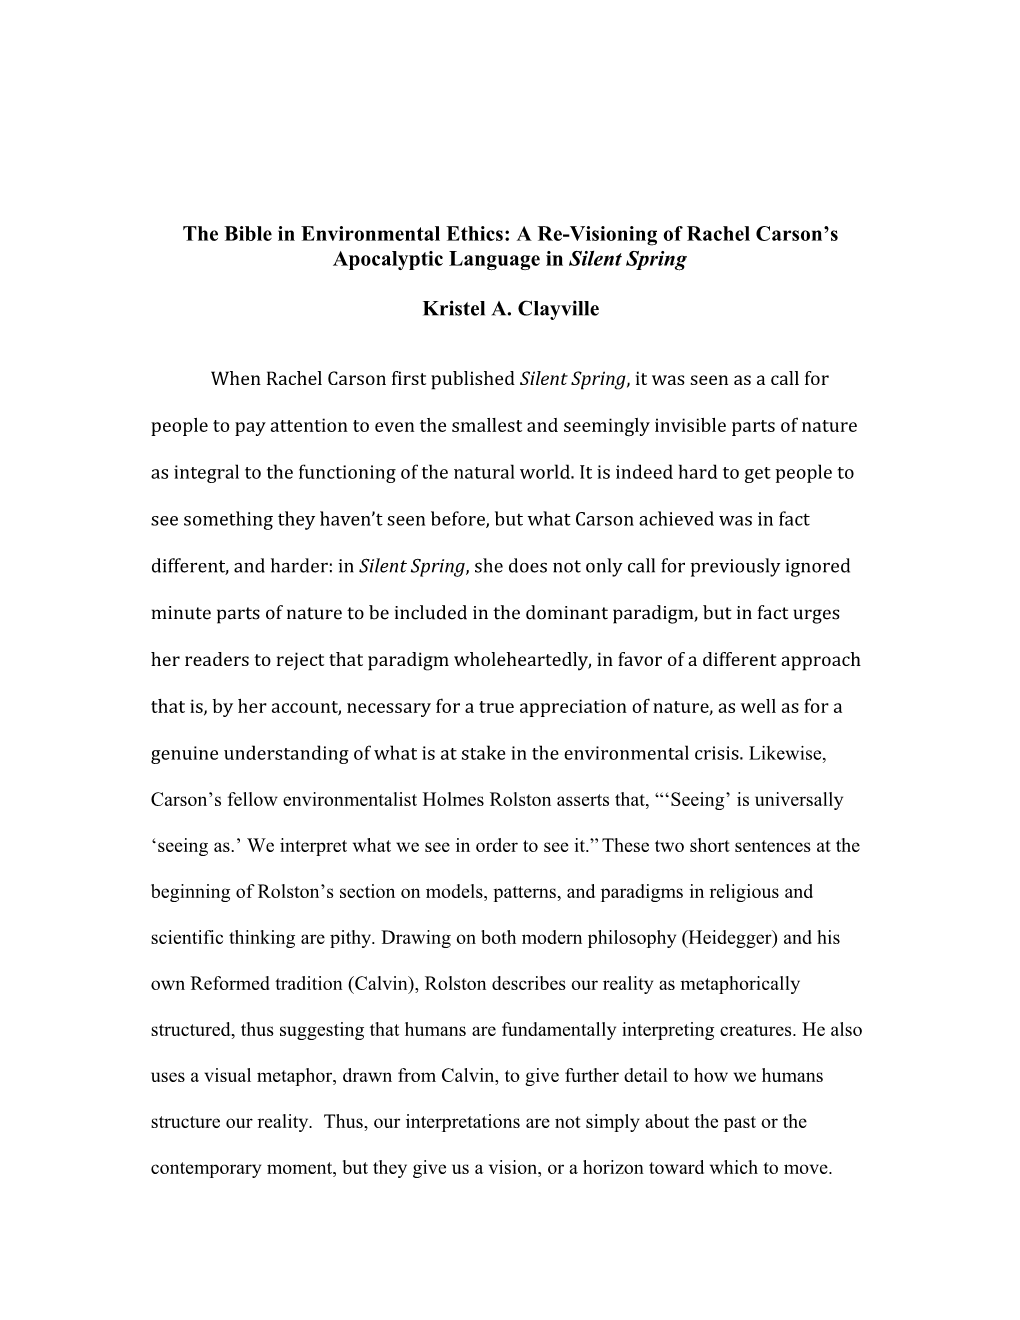 The Bible In Environmental Ethics: A Re-Visioning Of Rachel Carson’S Apocalyptic Language In Silent Spring